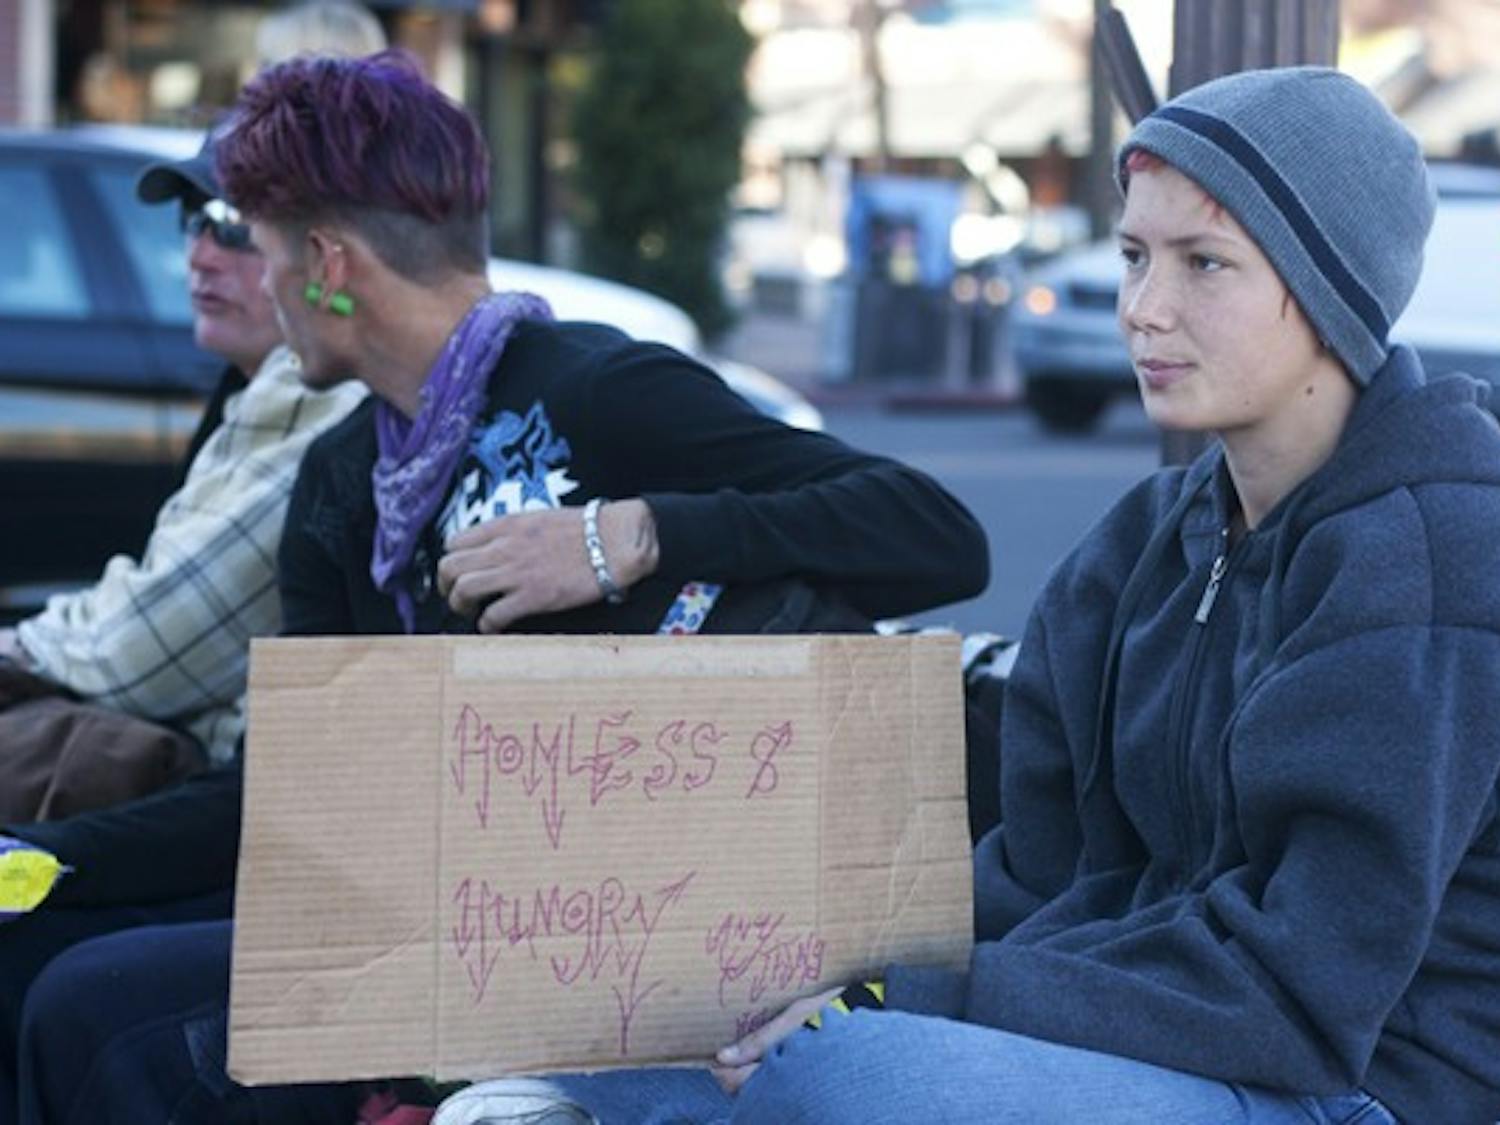 Sugar Girl sits with Eric Super Man and Pony Boy, holding up a sign that says "Homeless & Hungry" on Mill Avenue Monday afternoon. (Photo by Perla Farias)